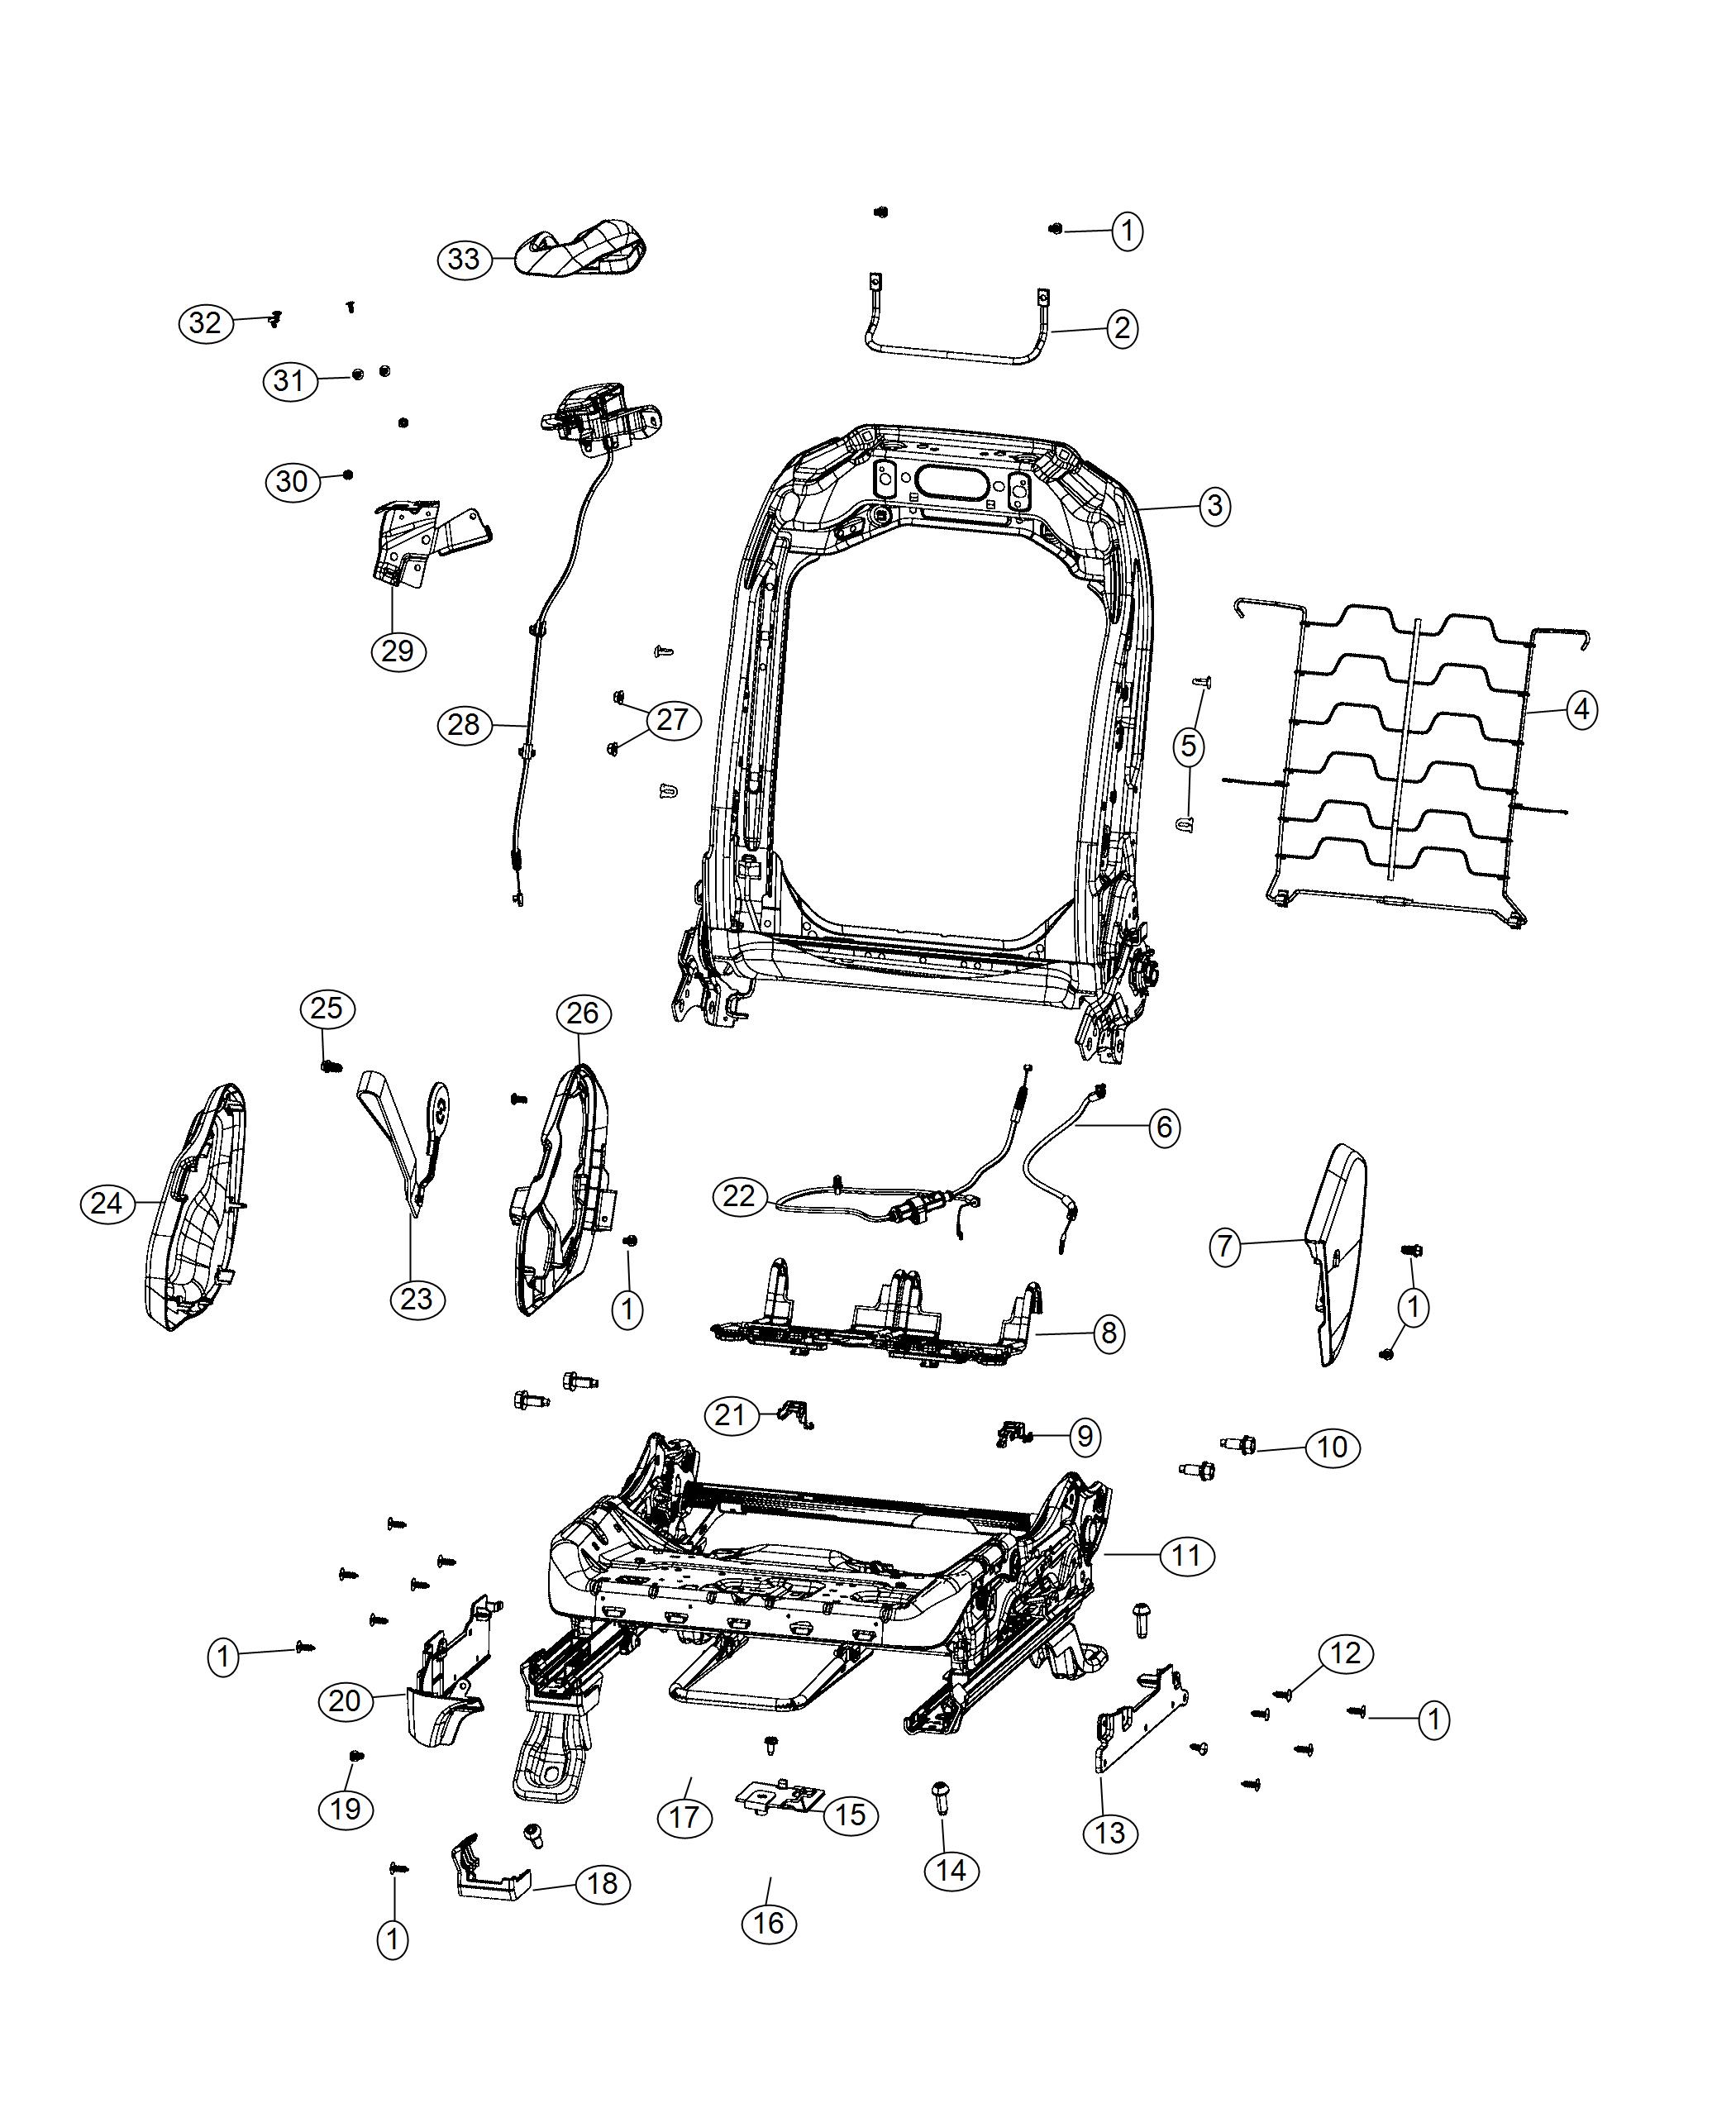 Diagram Adjusters, Recliners, Shields and Risers - Passenger Seat - 72 Body. for your Jeep Wrangler  